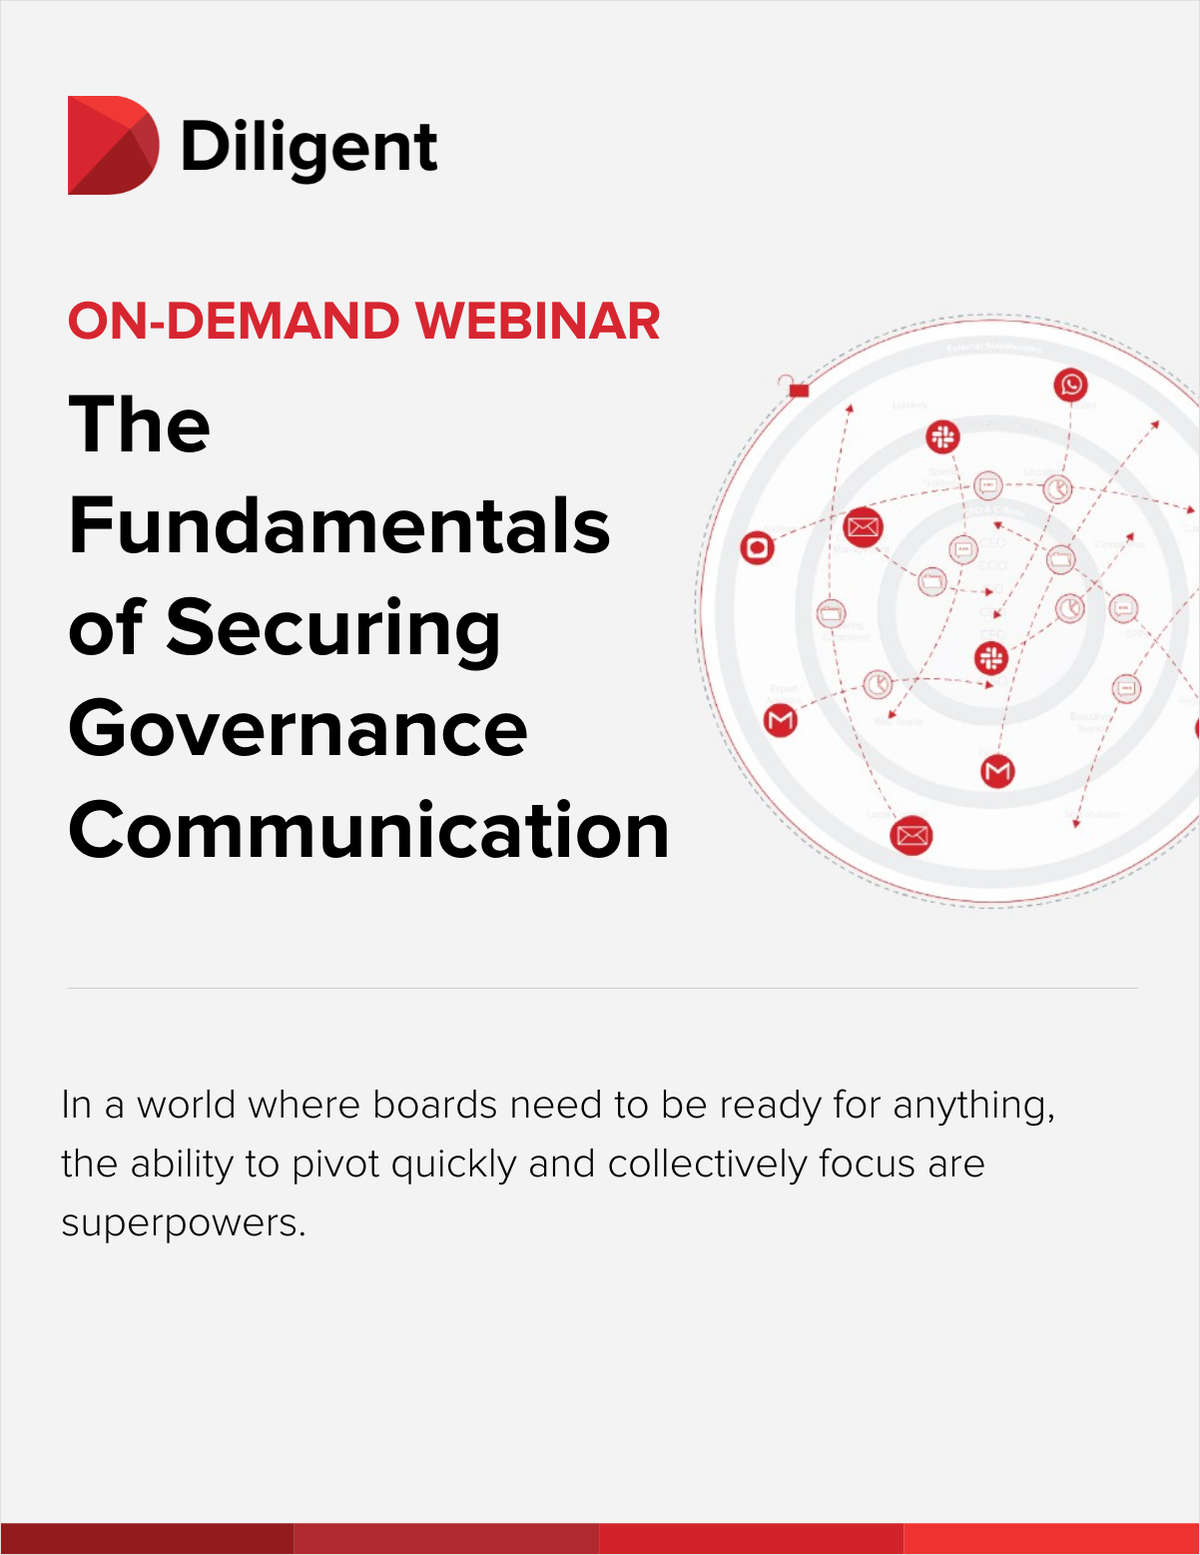 The Fundamentals of Securing Governance Communication